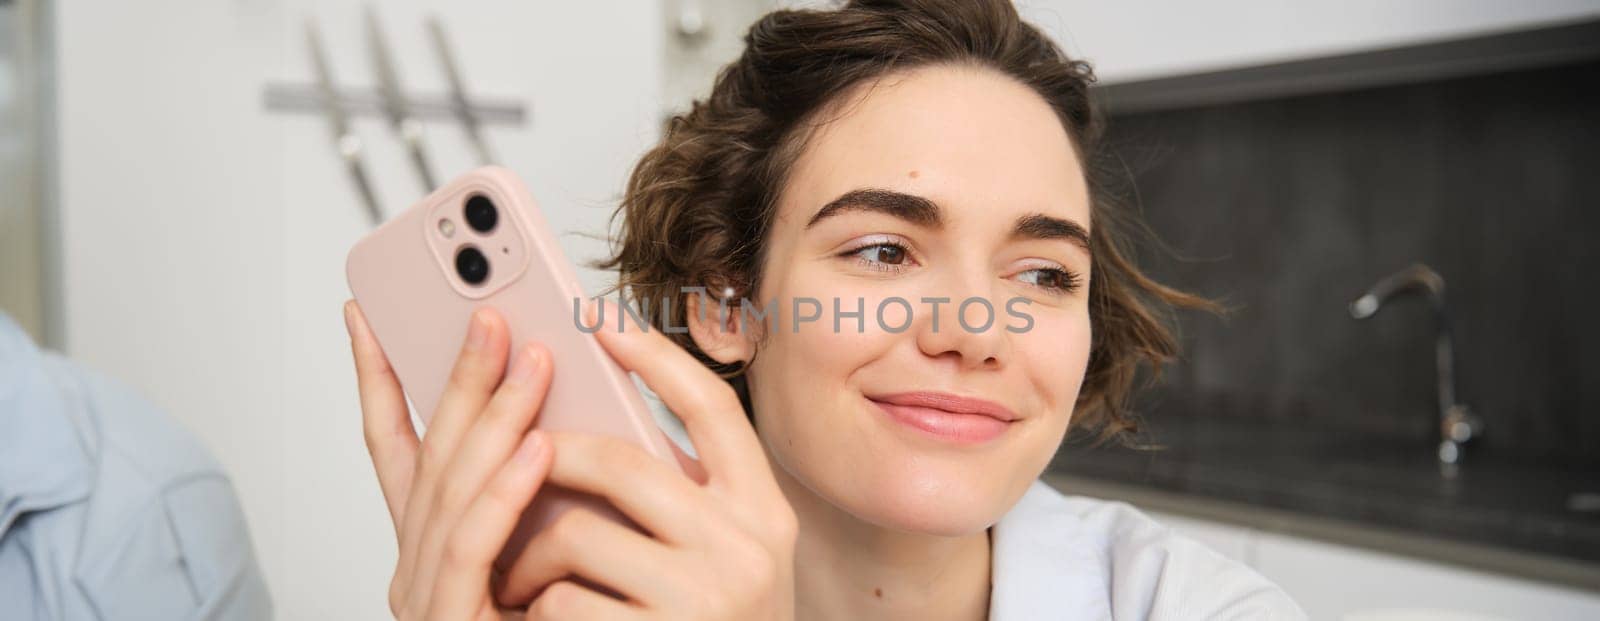 Close up portrait of smiling brunette woman using smartphone, holding mobile phone in hands and looking away, concept of takeaway order, online shopping and communication.